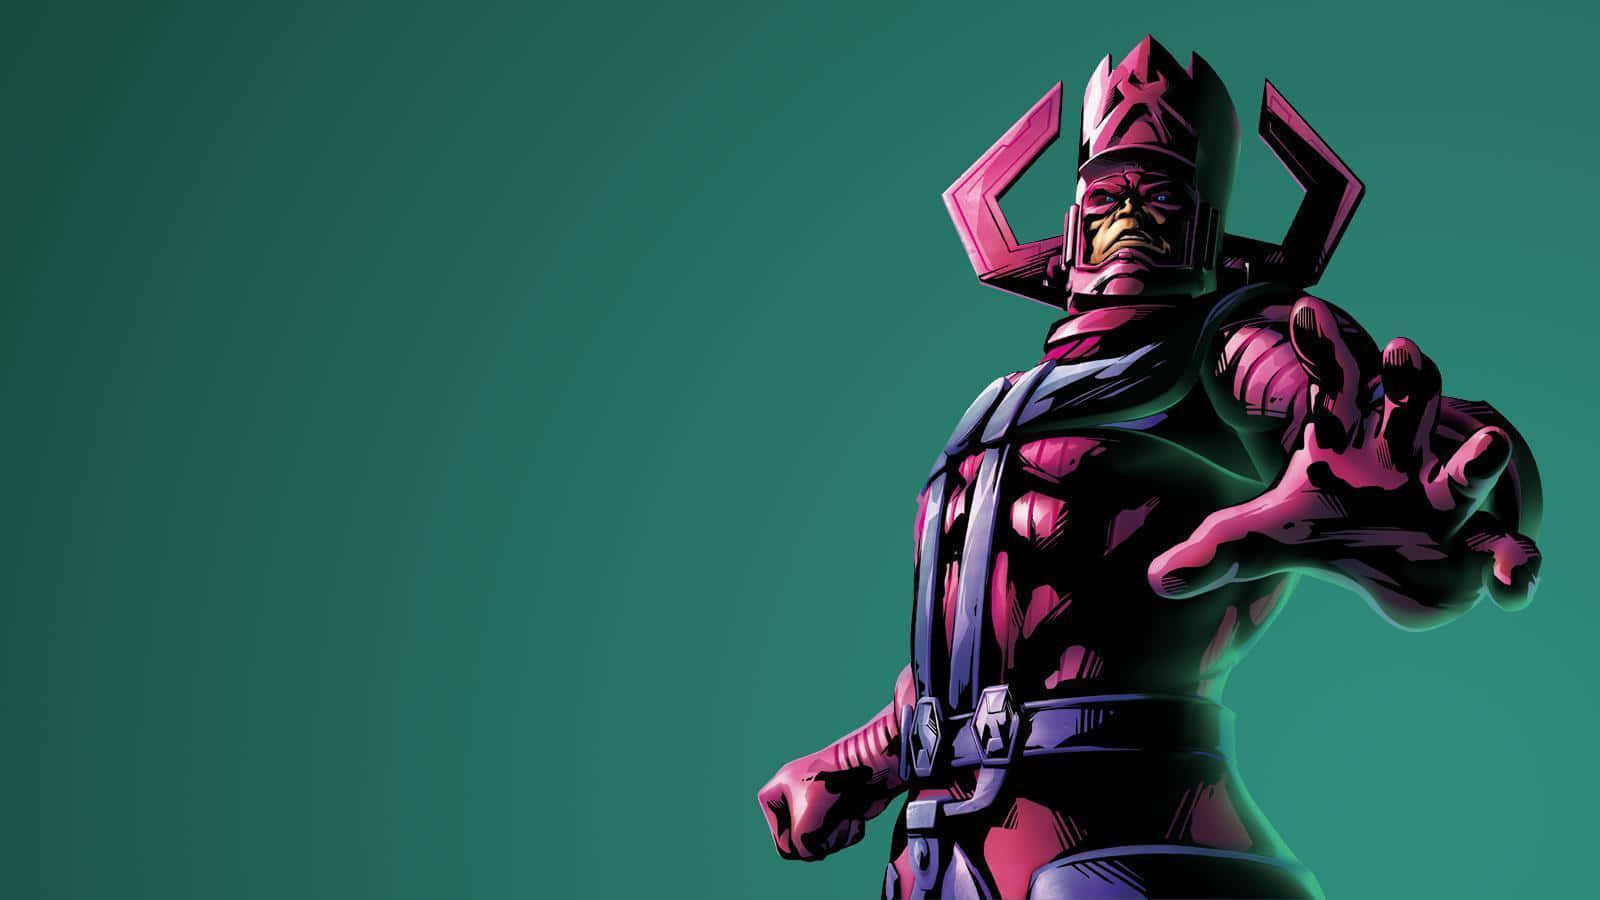 Caption: Galactus, The World Eater, Looms Over the Universe Wallpaper